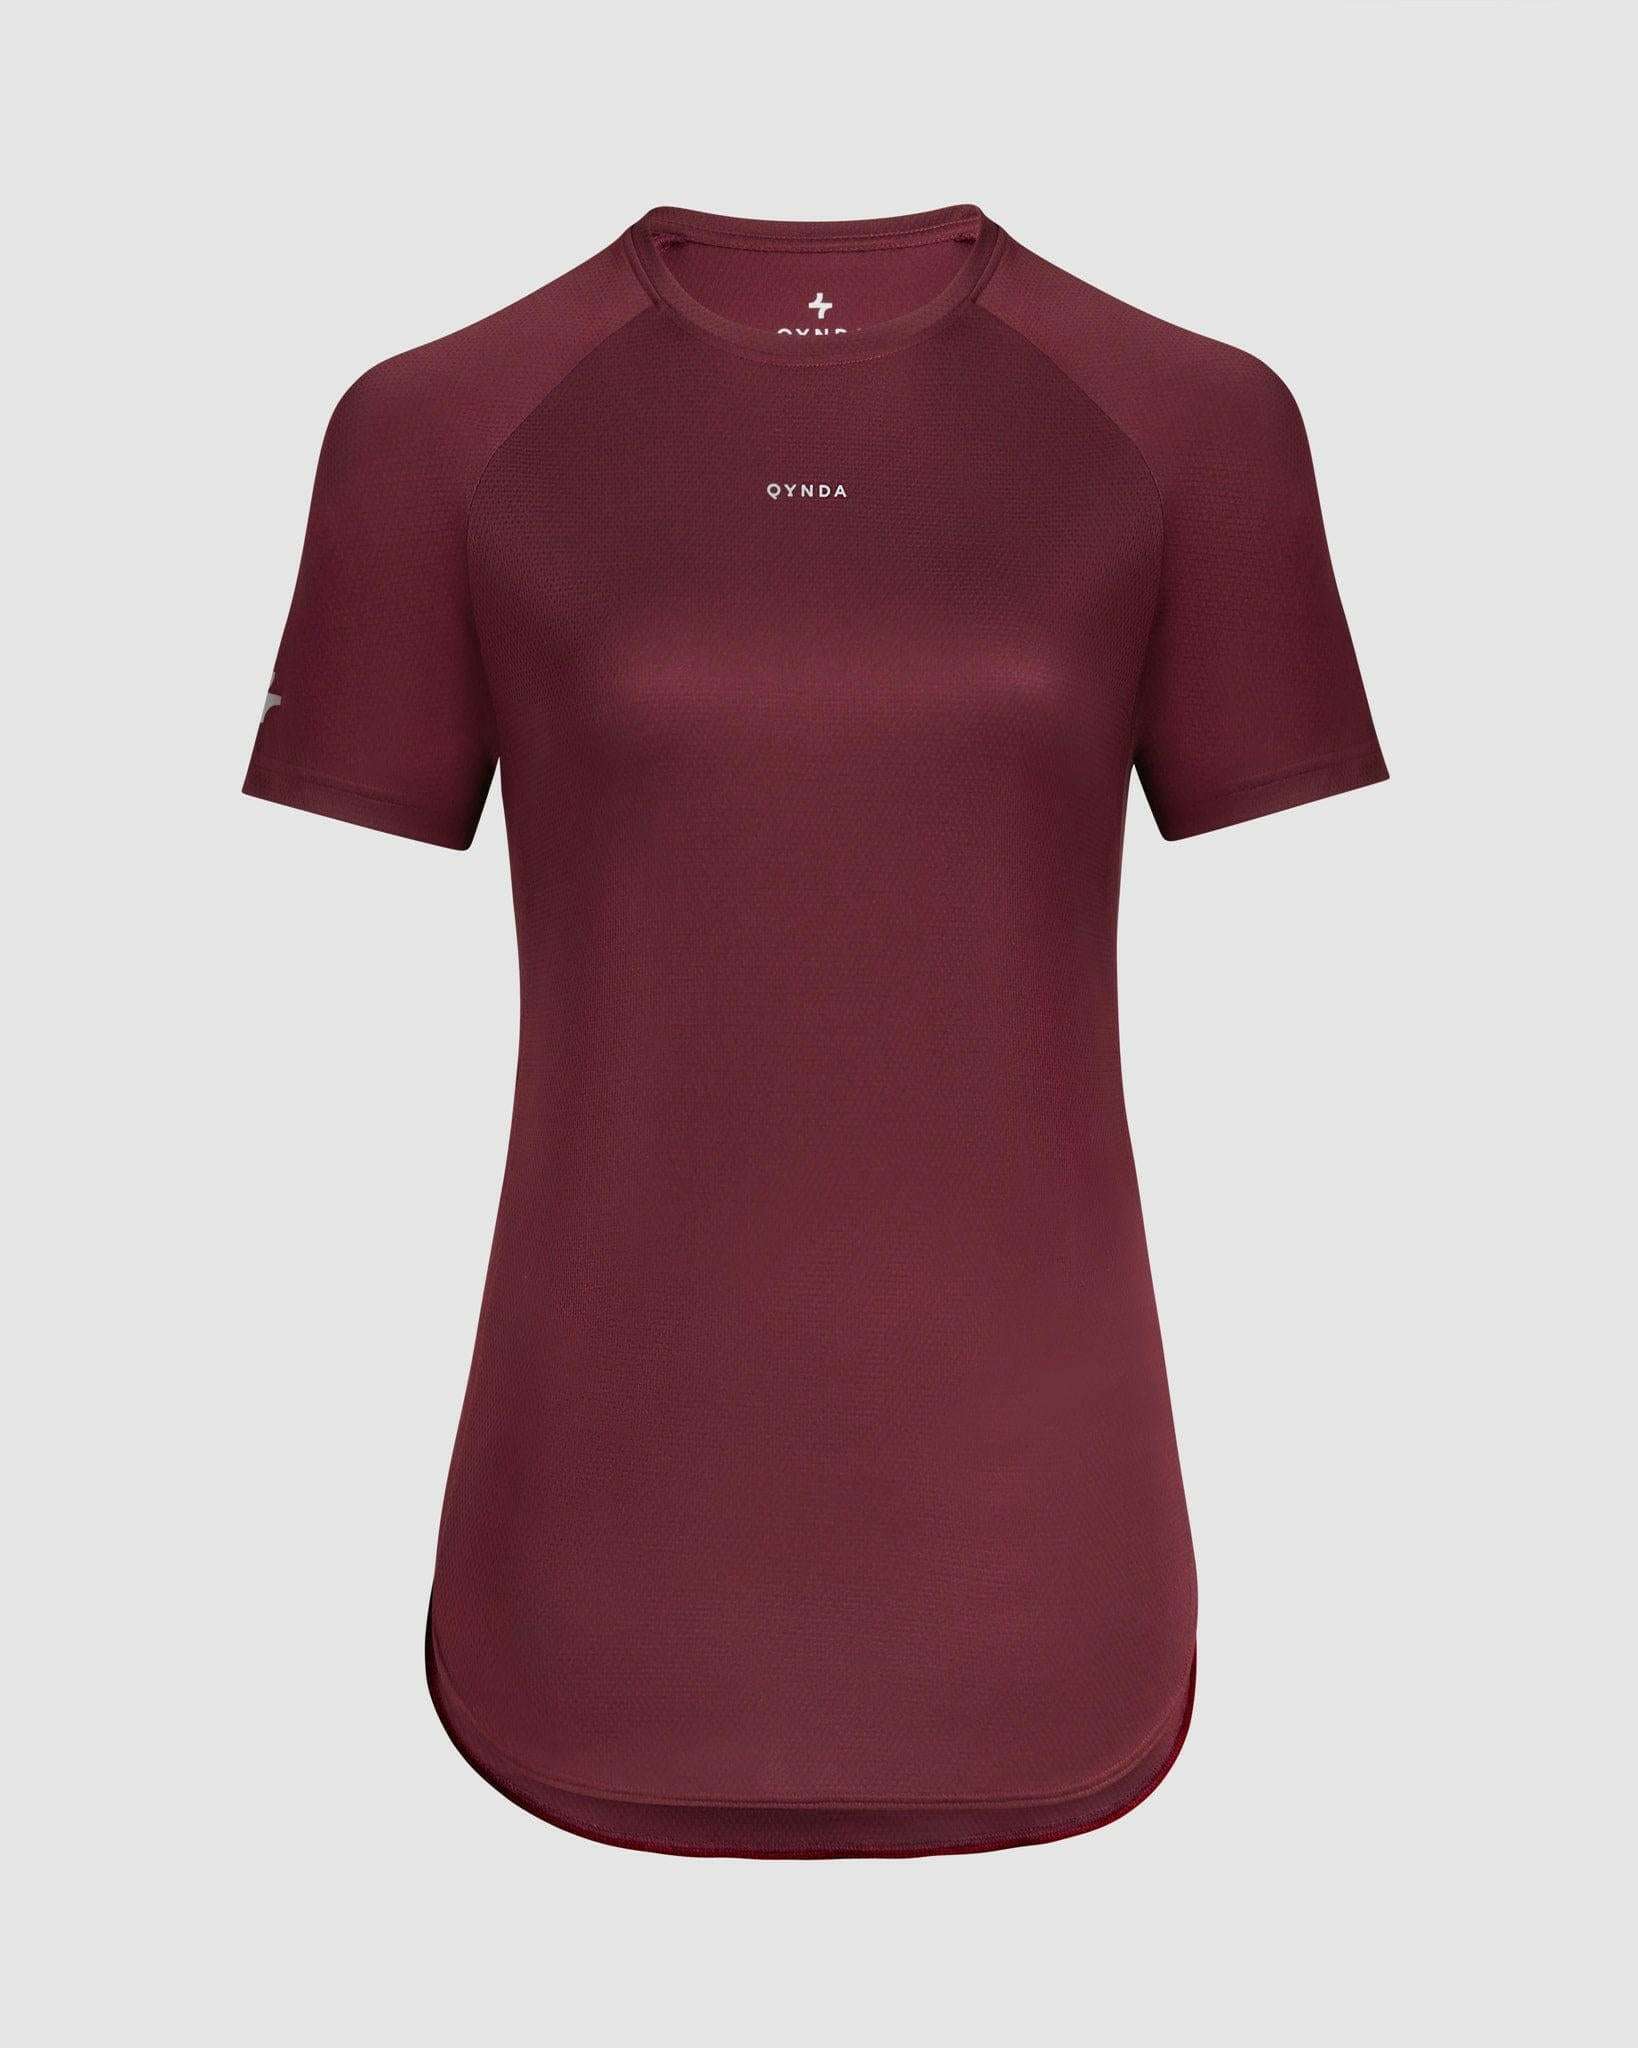 A maroon, athletic fit, short-sleeved BREATHE T-SHIRT by Qynda designed for breathability, displayed on a plain white background.